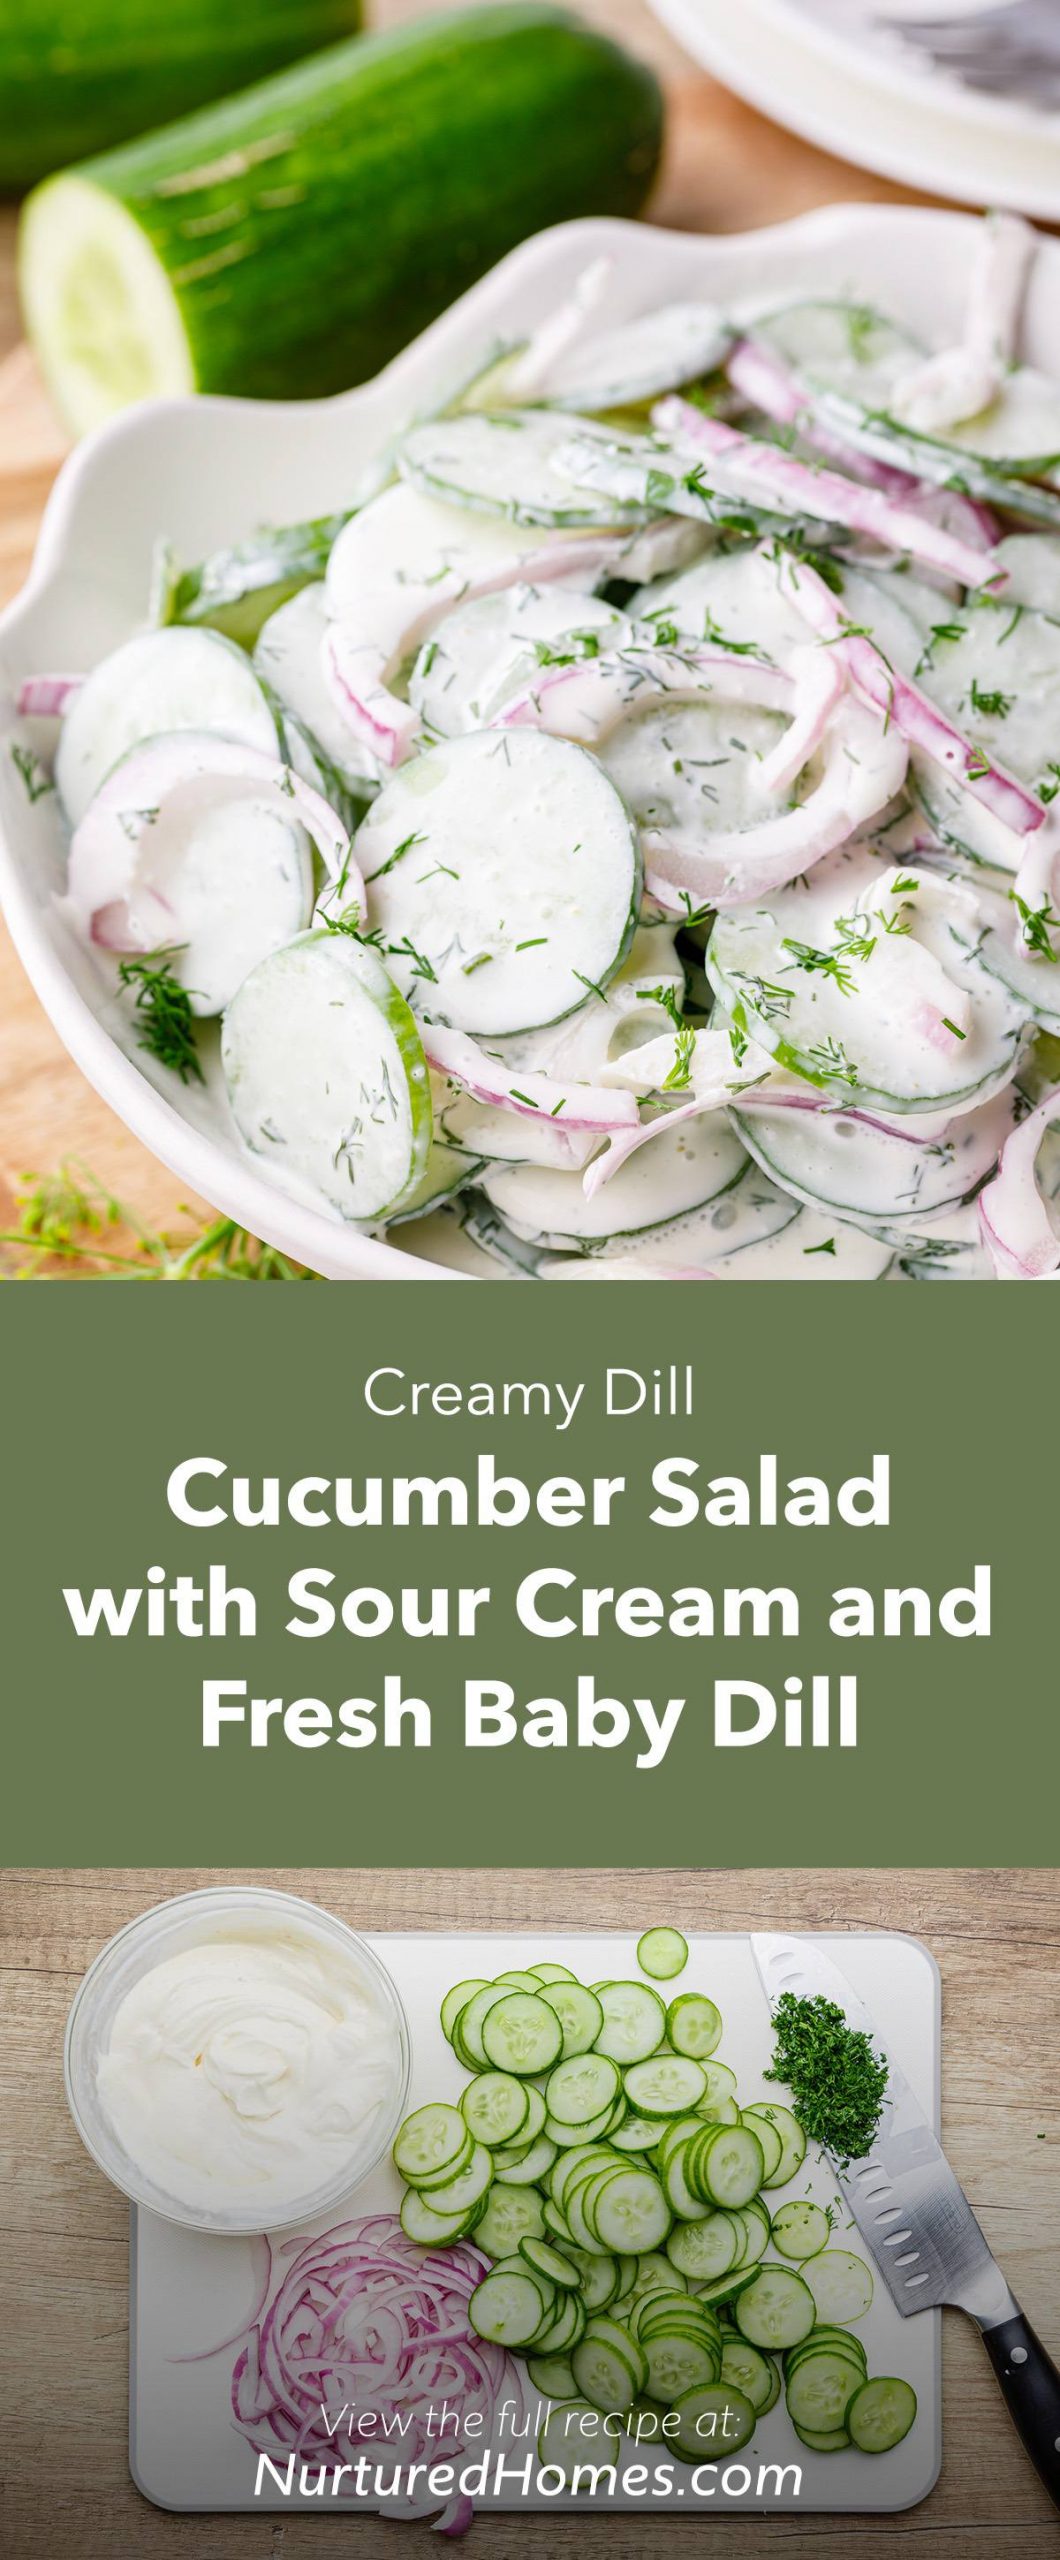 Creamy Dill Cucumber Salad with Sour Cream and Fresh Baby Dill